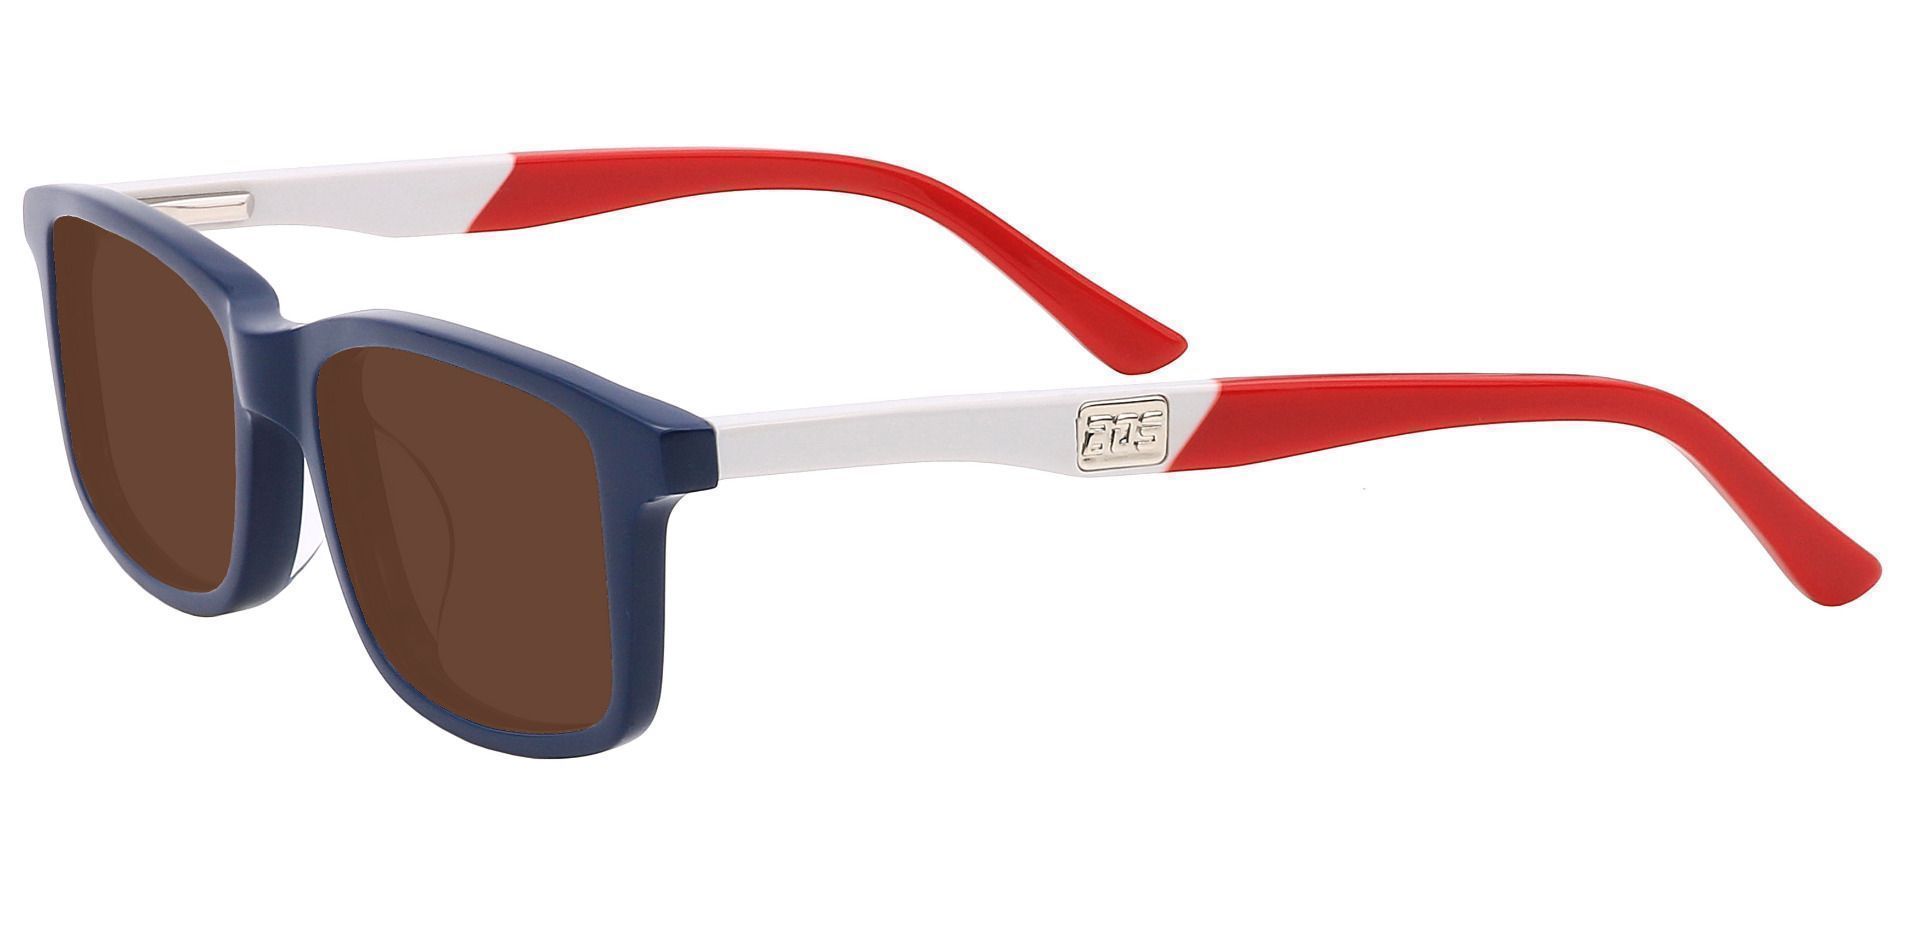 Hub Rectangle Non-Rx Sunglasses - Blue Frame With Brown Lenses